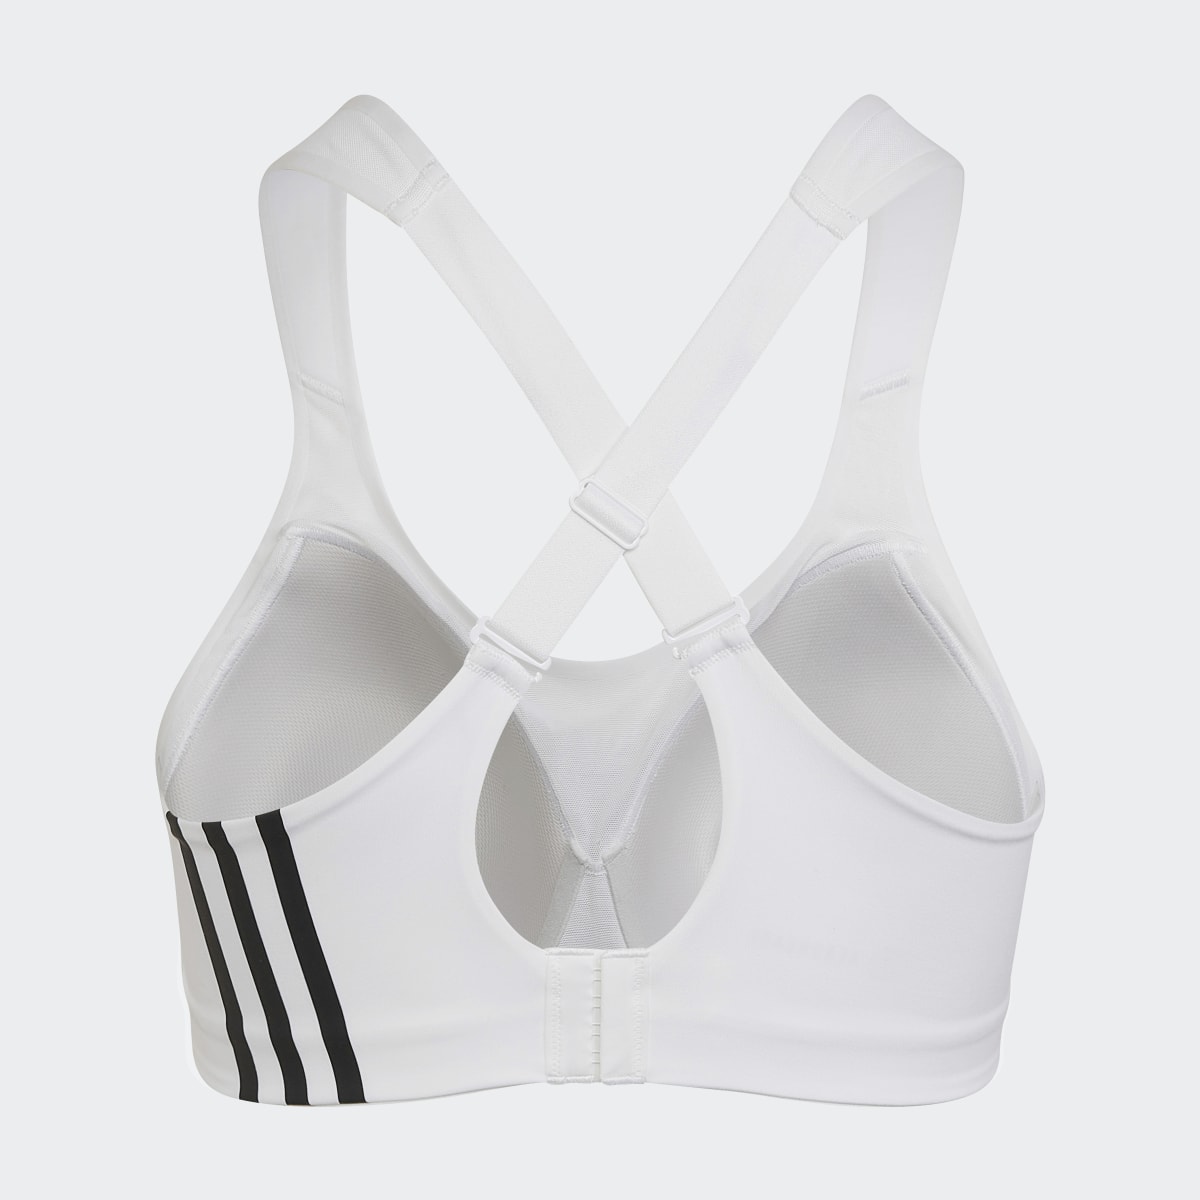 Adidas Brassière de training Maintien fort adidas TLRD Impact (Grandes tailles). 6